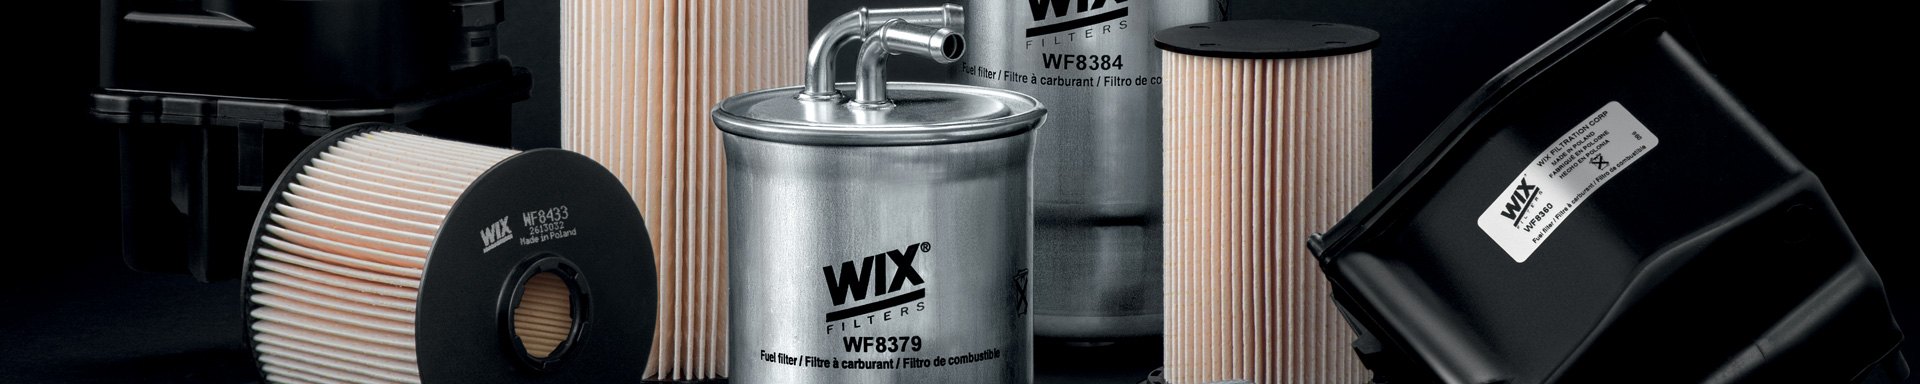 WIX Fuel Delivery